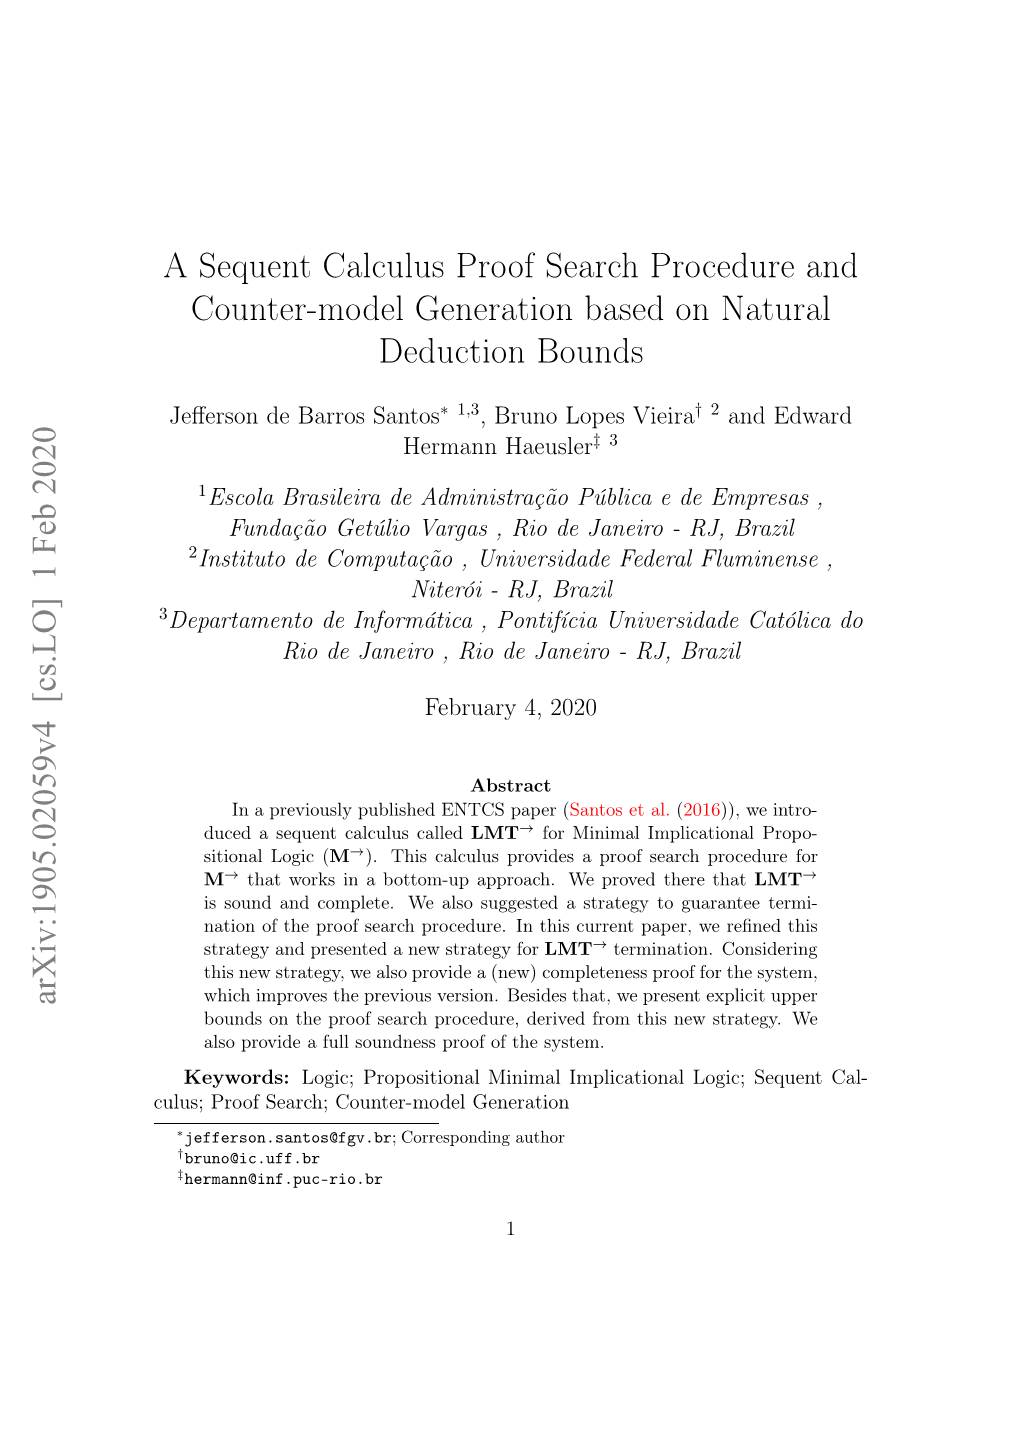 A Sequent Calculus Proof Search Procedure and Counter-Model